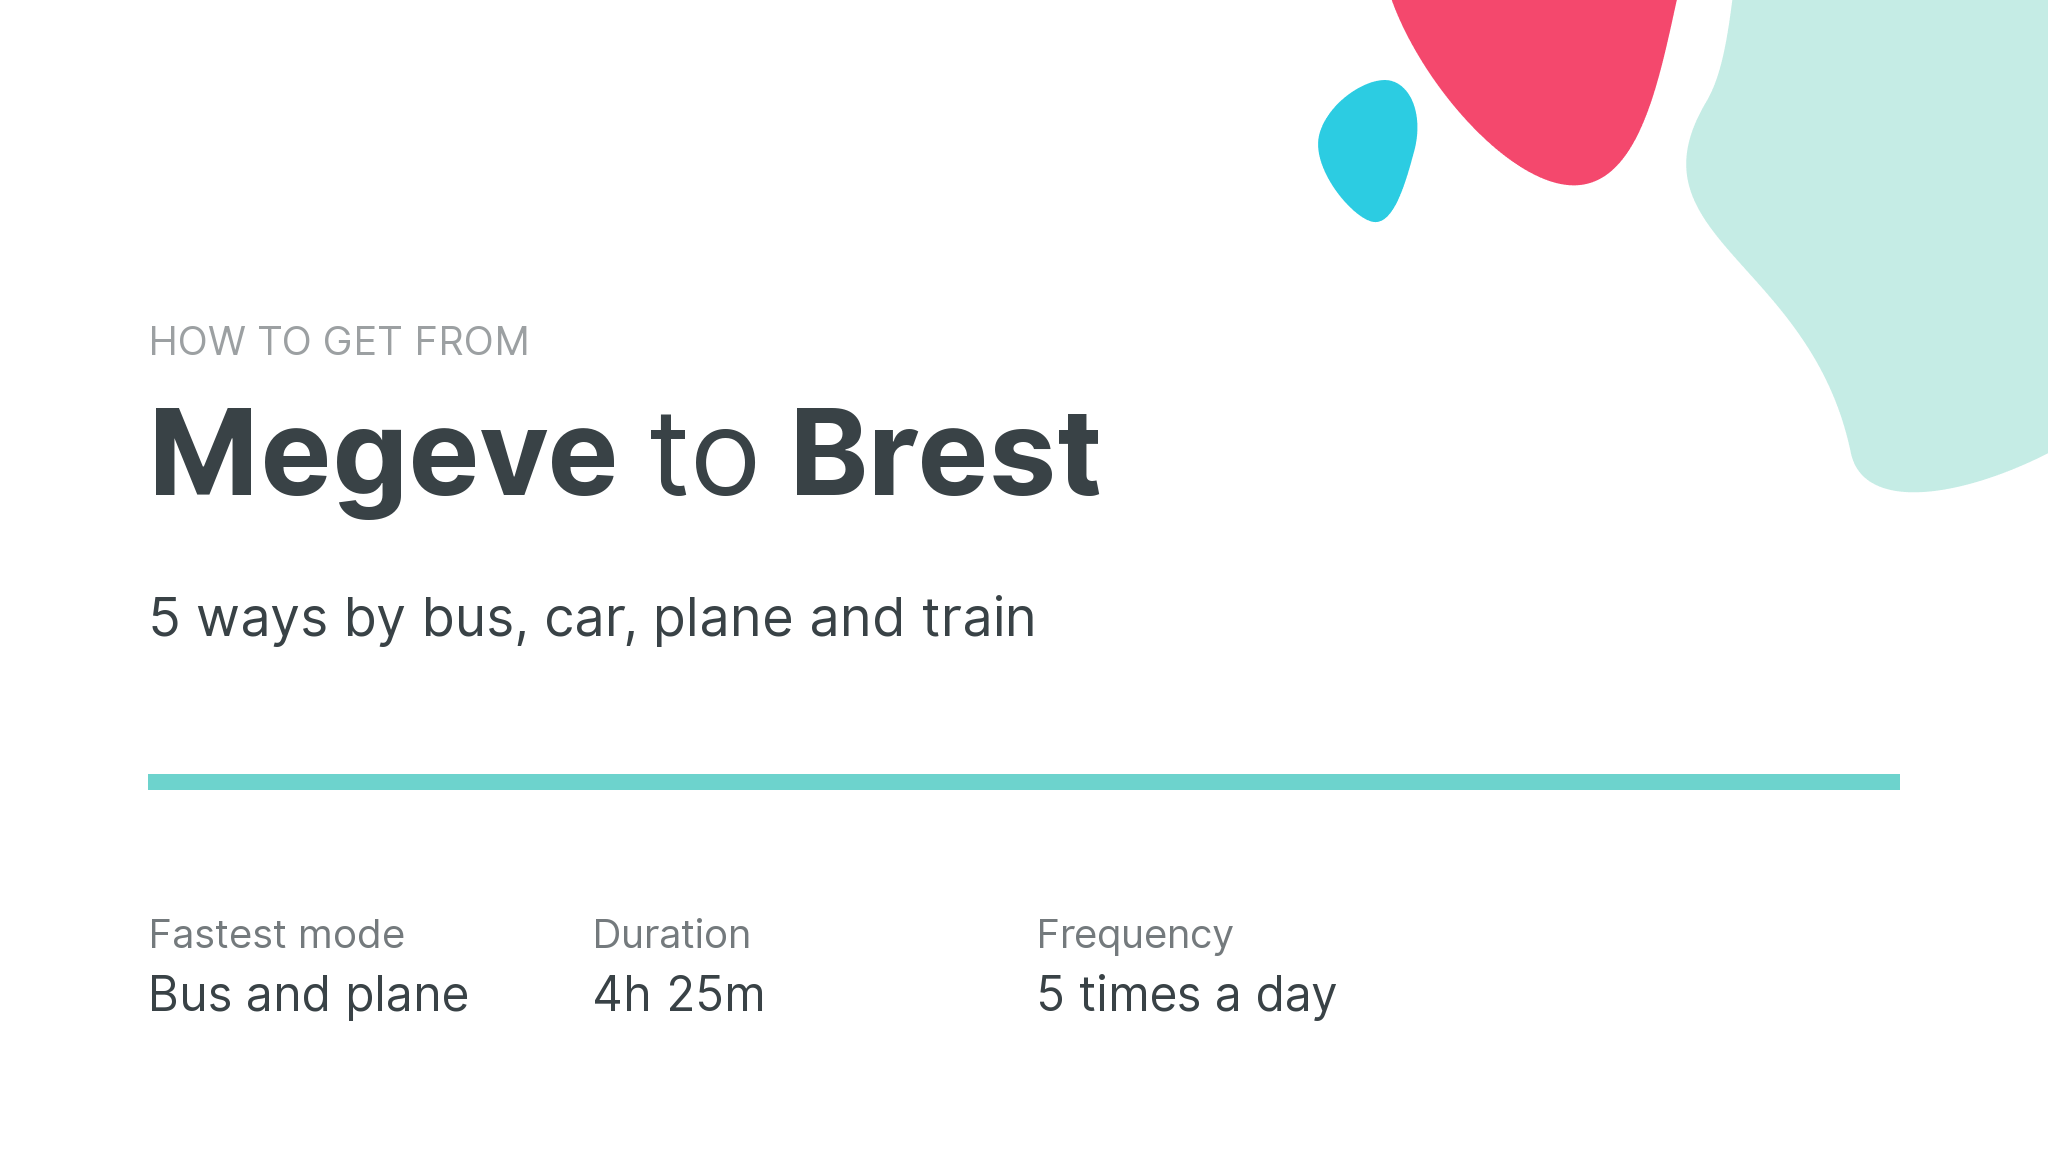 How do I get from Megeve to Brest